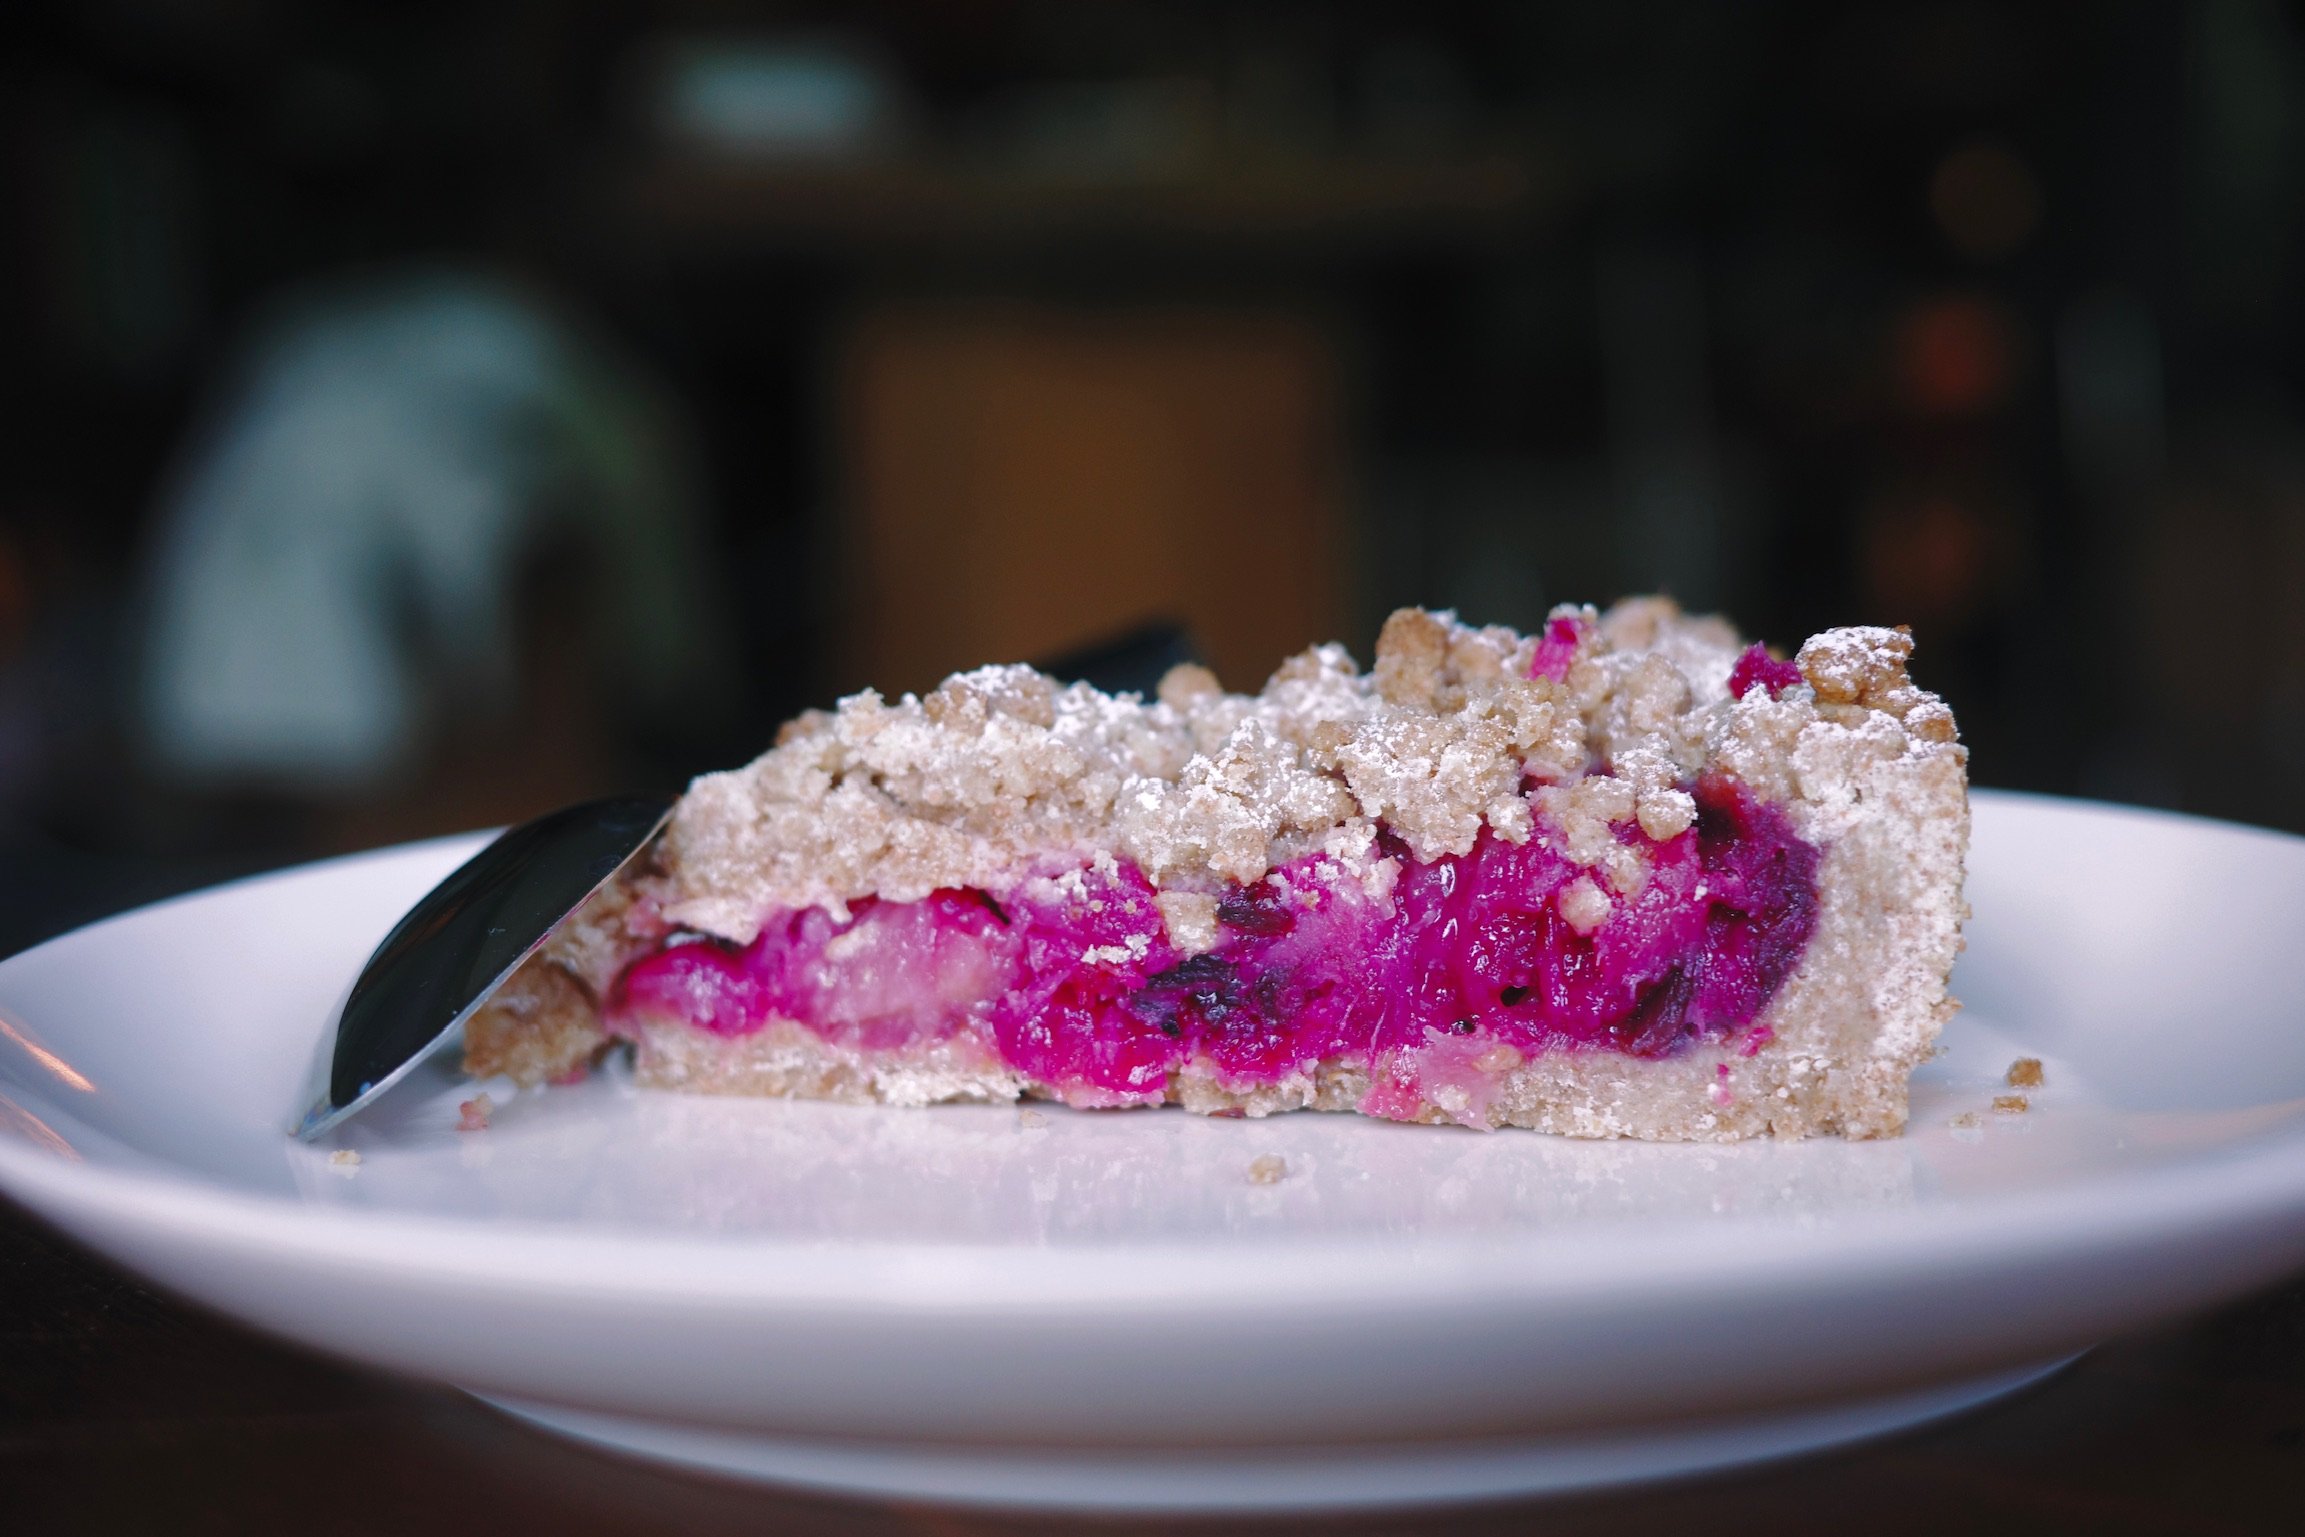 A crumble pie on a plate stuffed with pineapple and roselle.